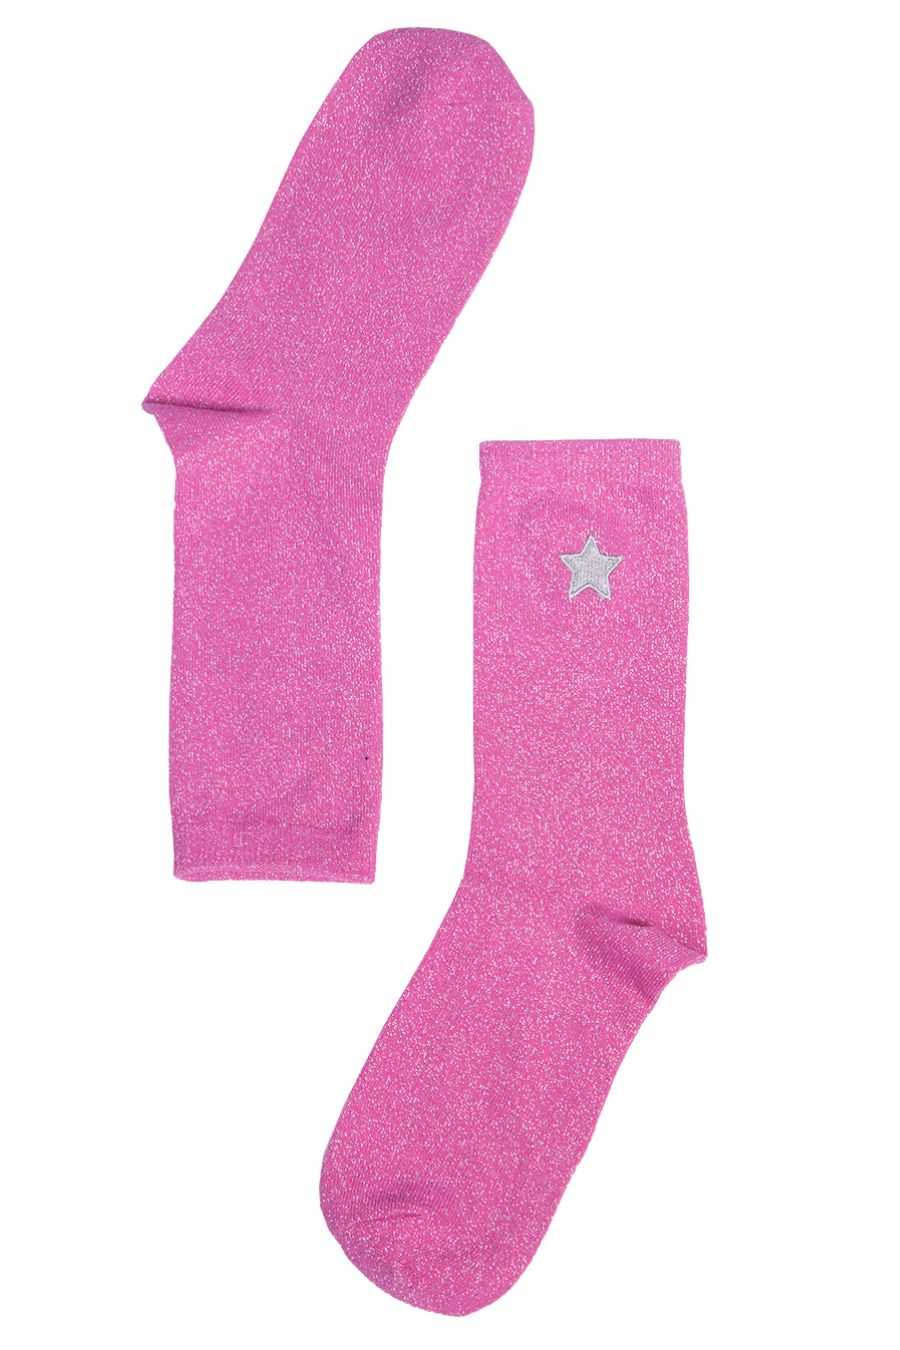 fuchsia and silver glitter socsk with silver embroidrered star